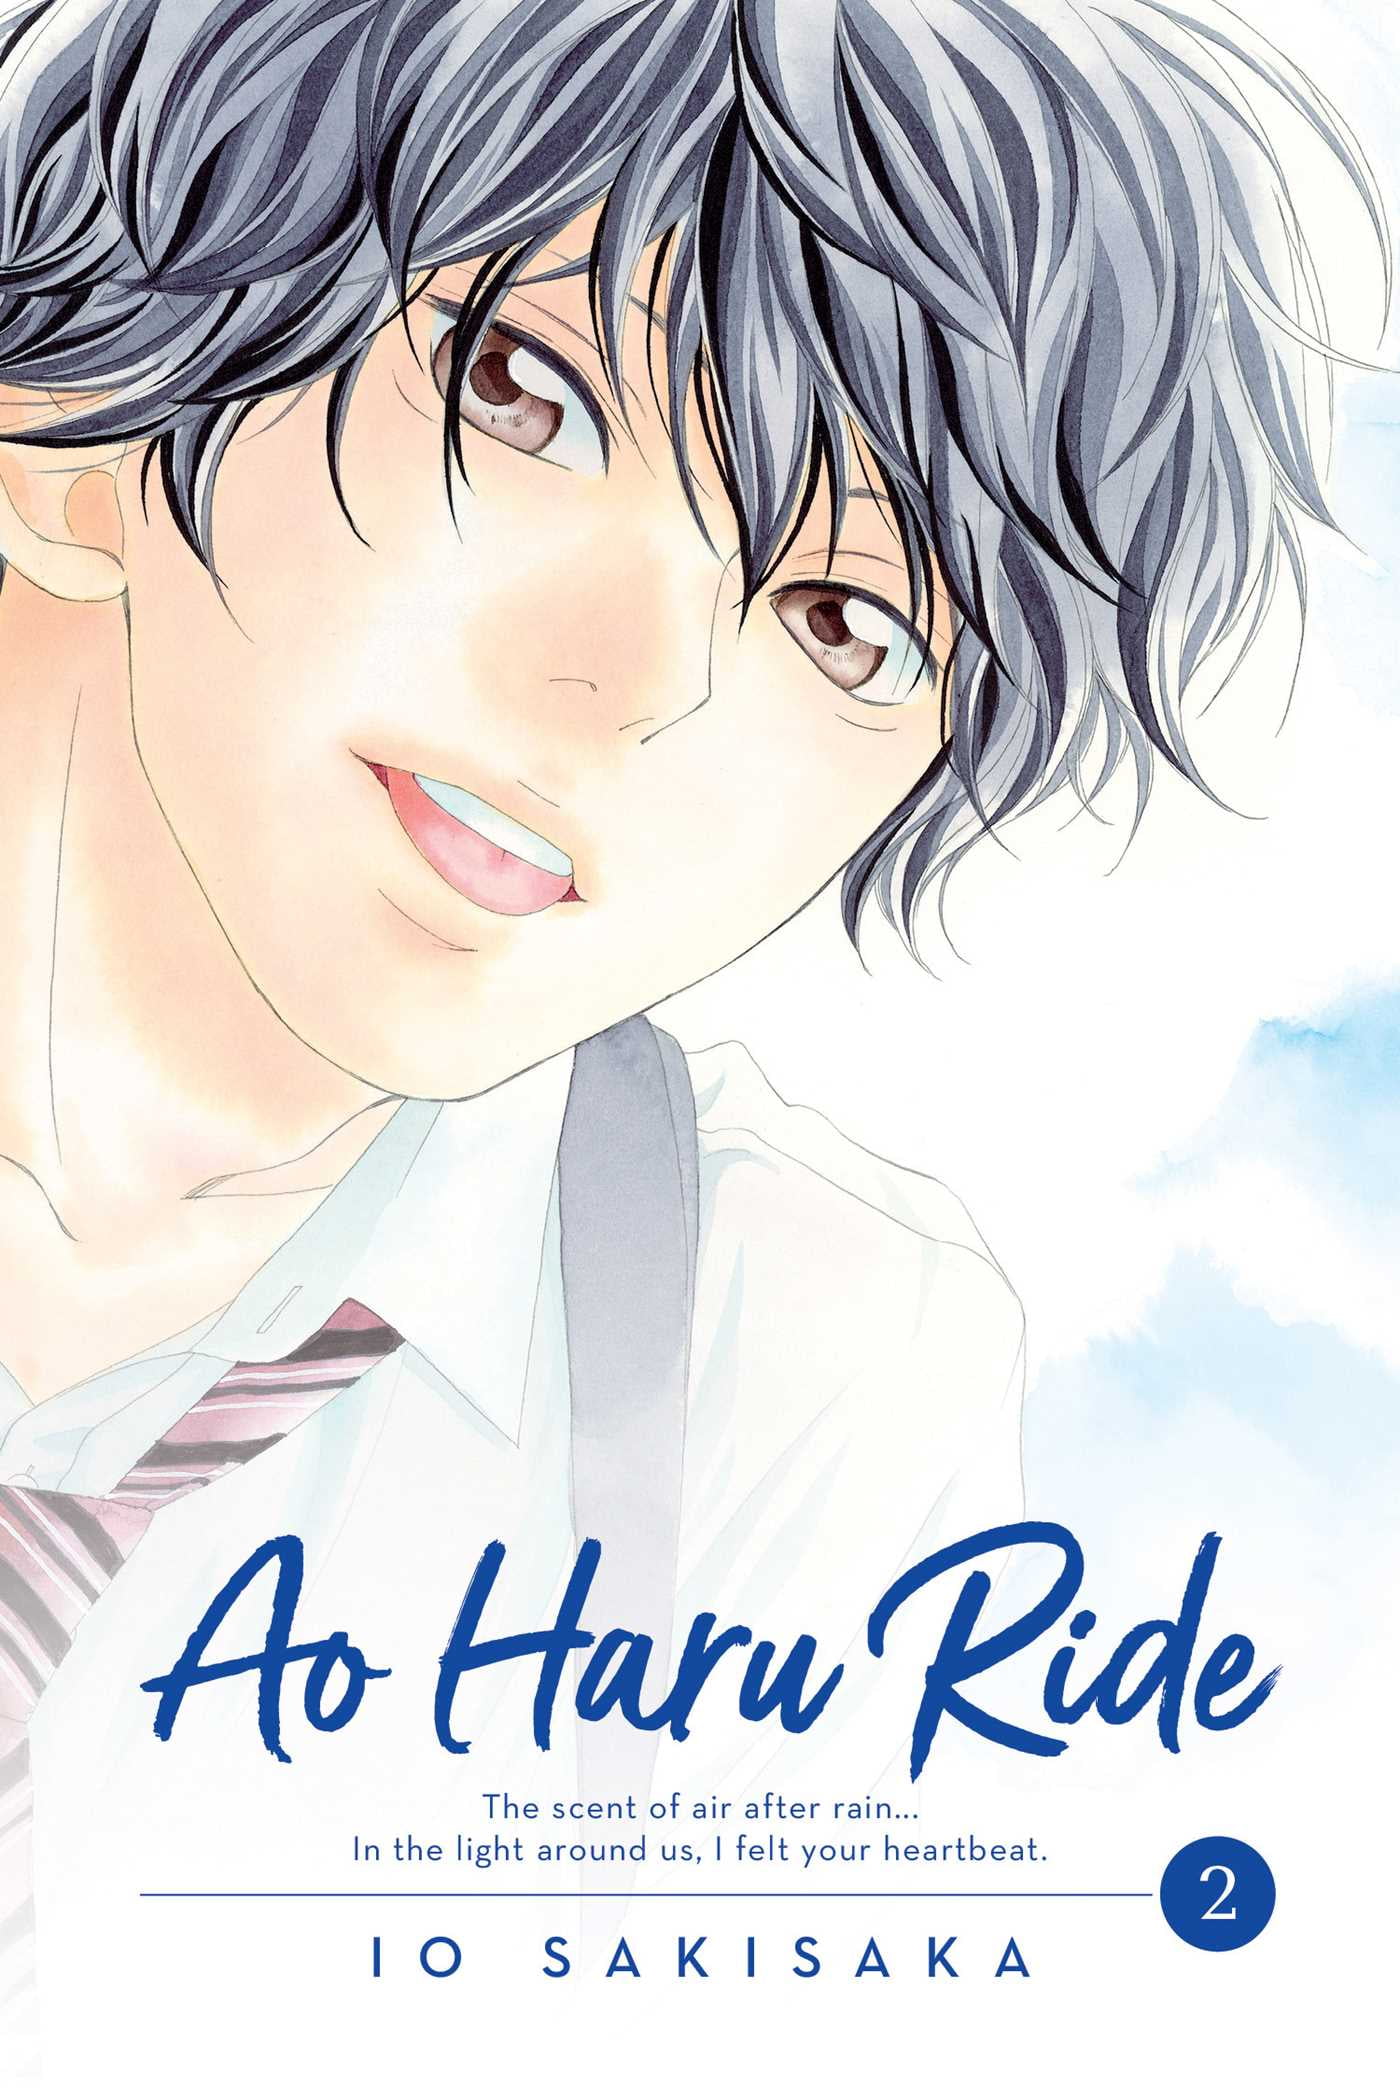 What are some good romance and soft anime like Ao Haru Ride